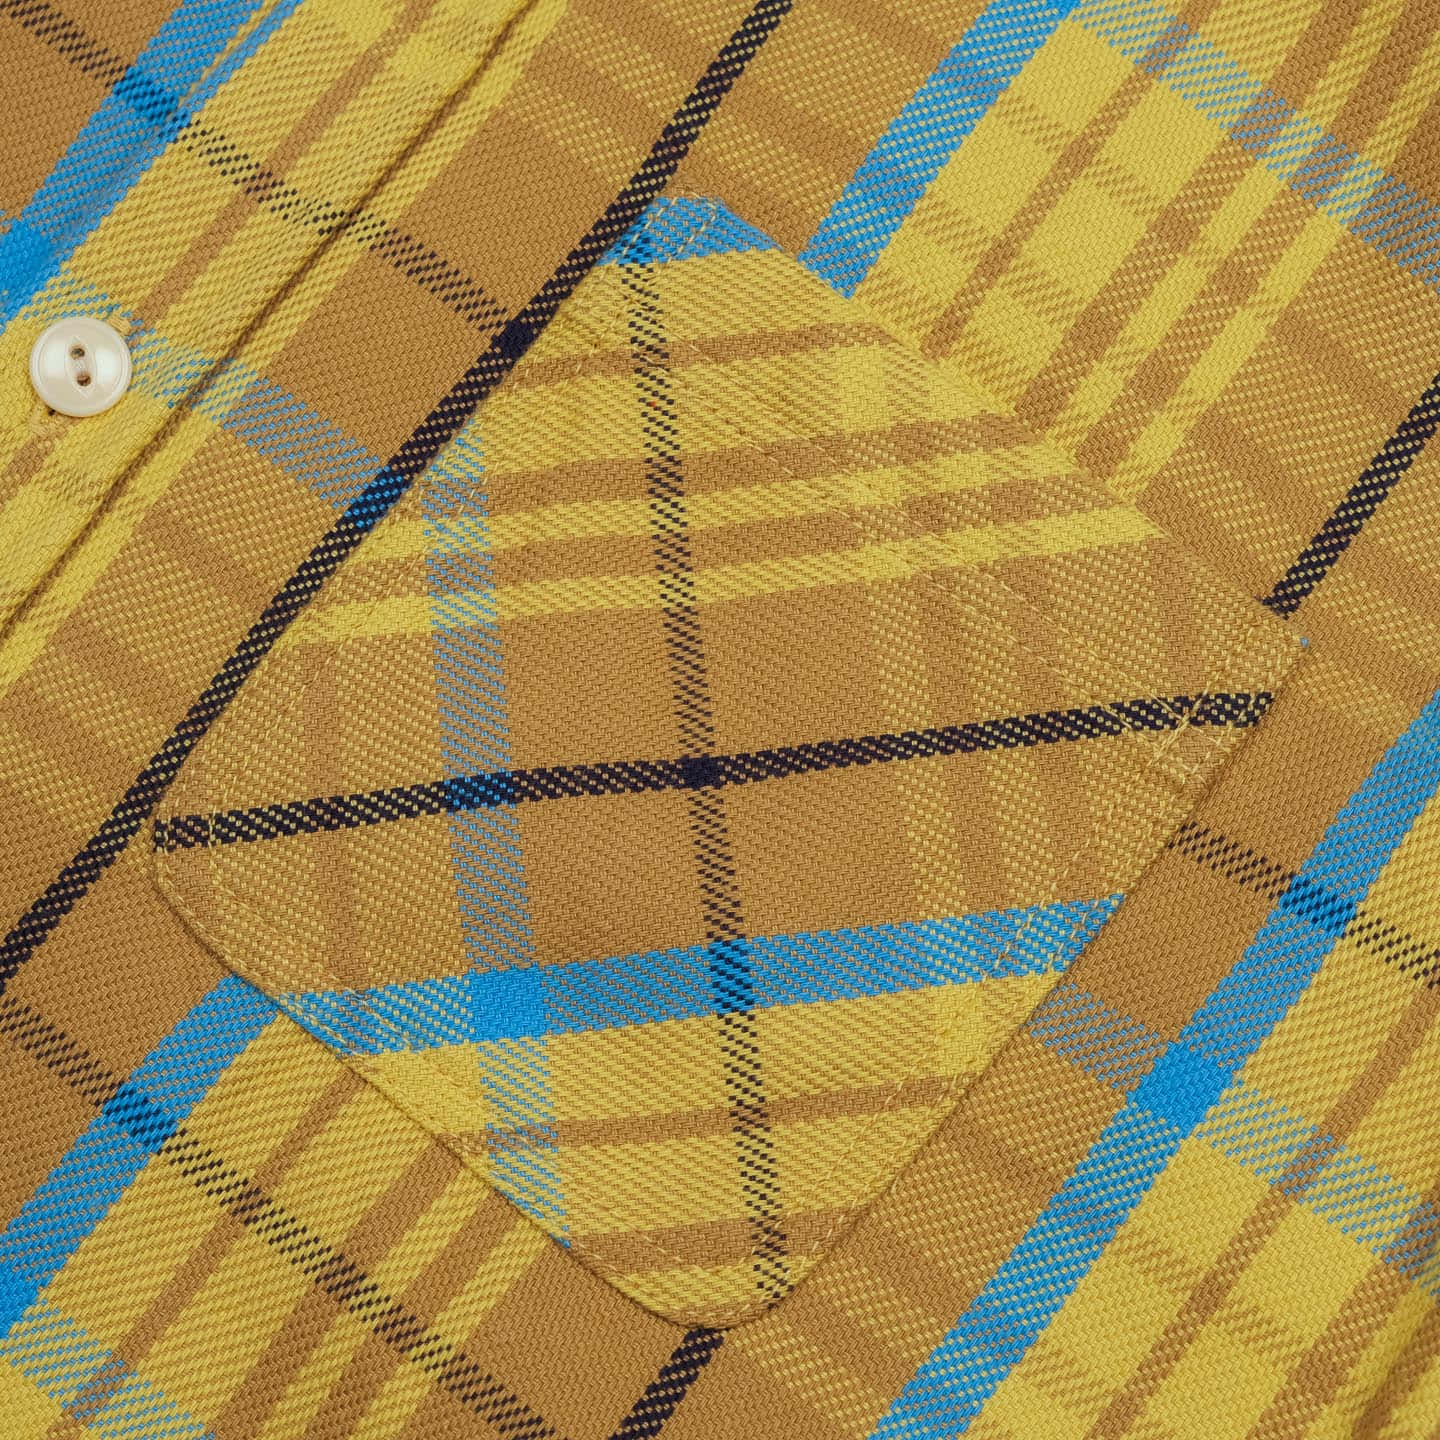 Download the scottish plaid shirt in yellow | Wallpapers.com